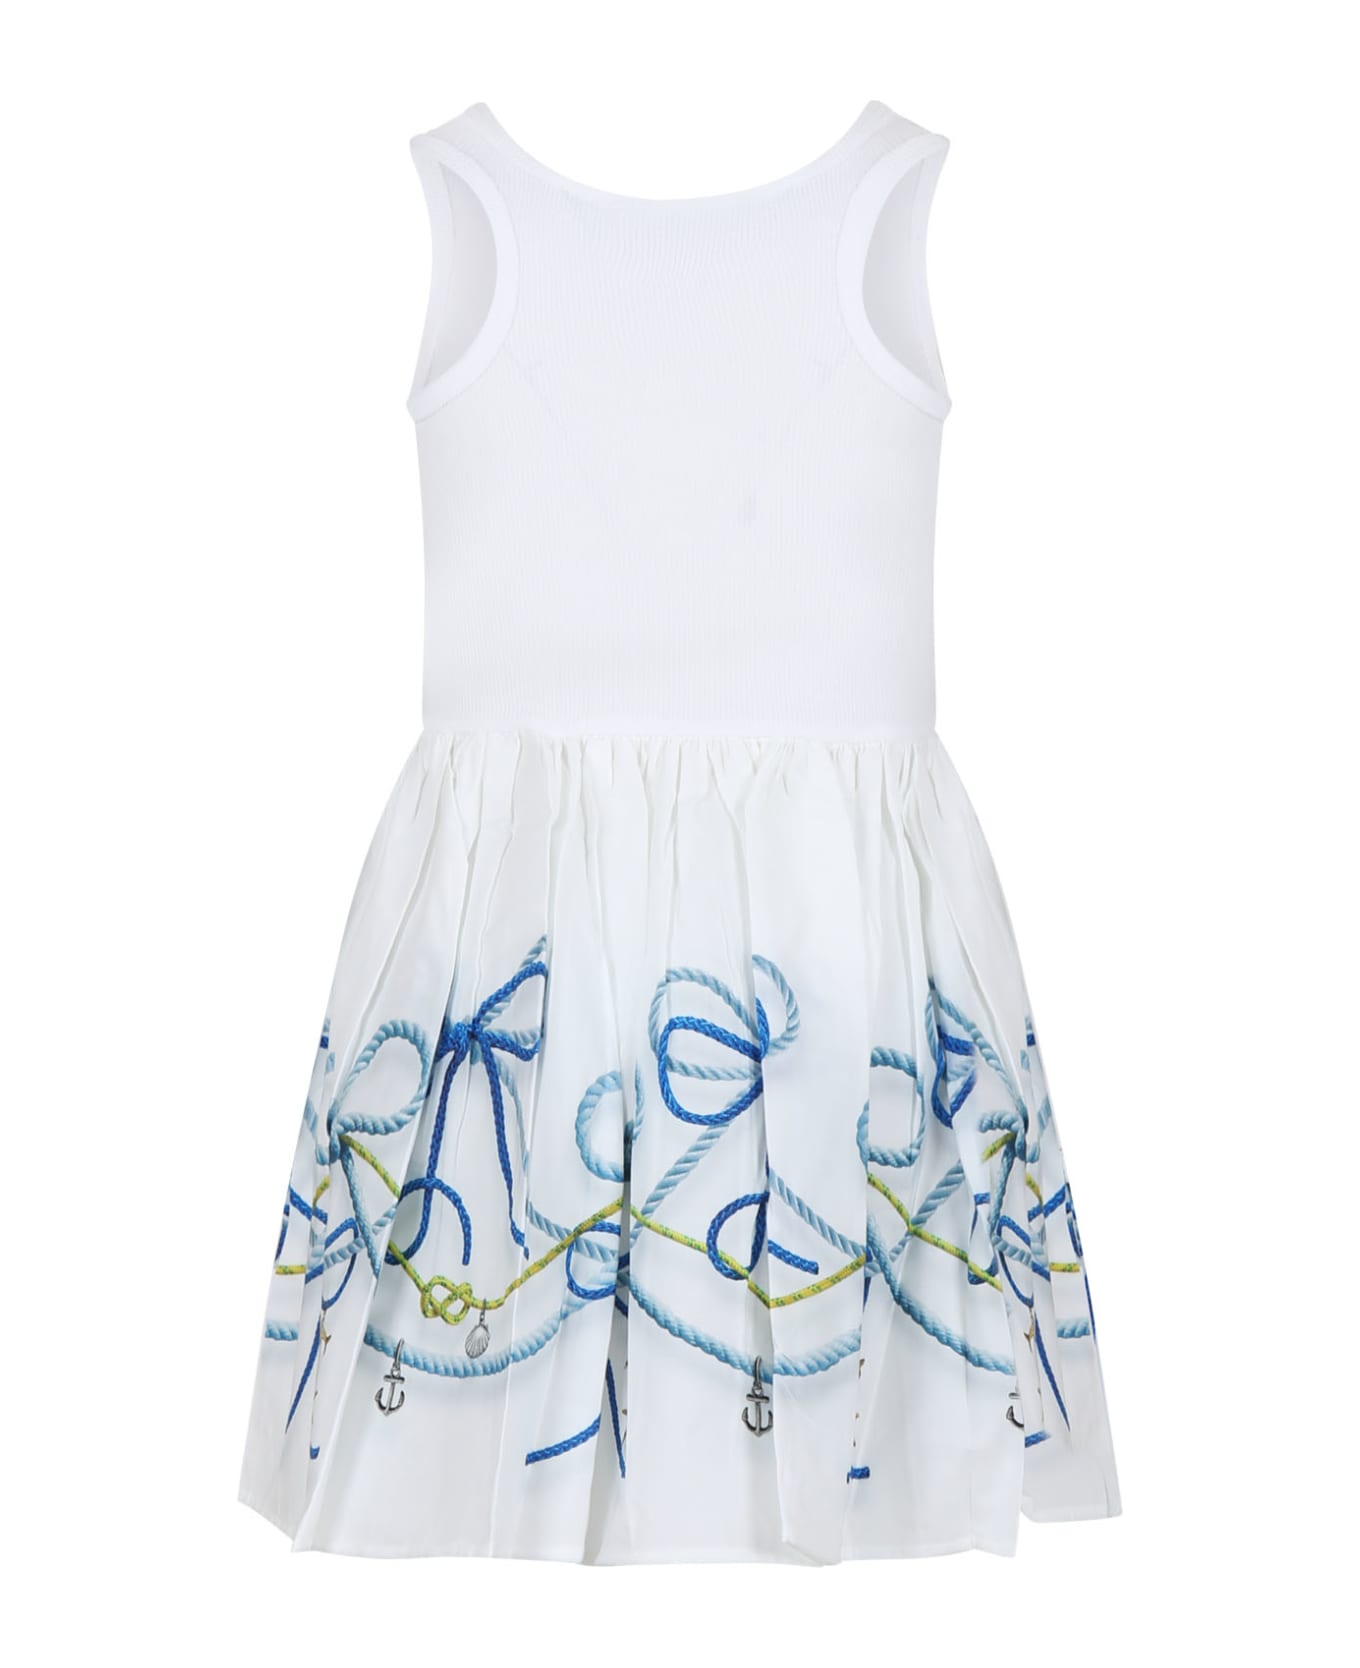 Molo White Dress For Girl With Bows Print - White ワンピース＆ドレス